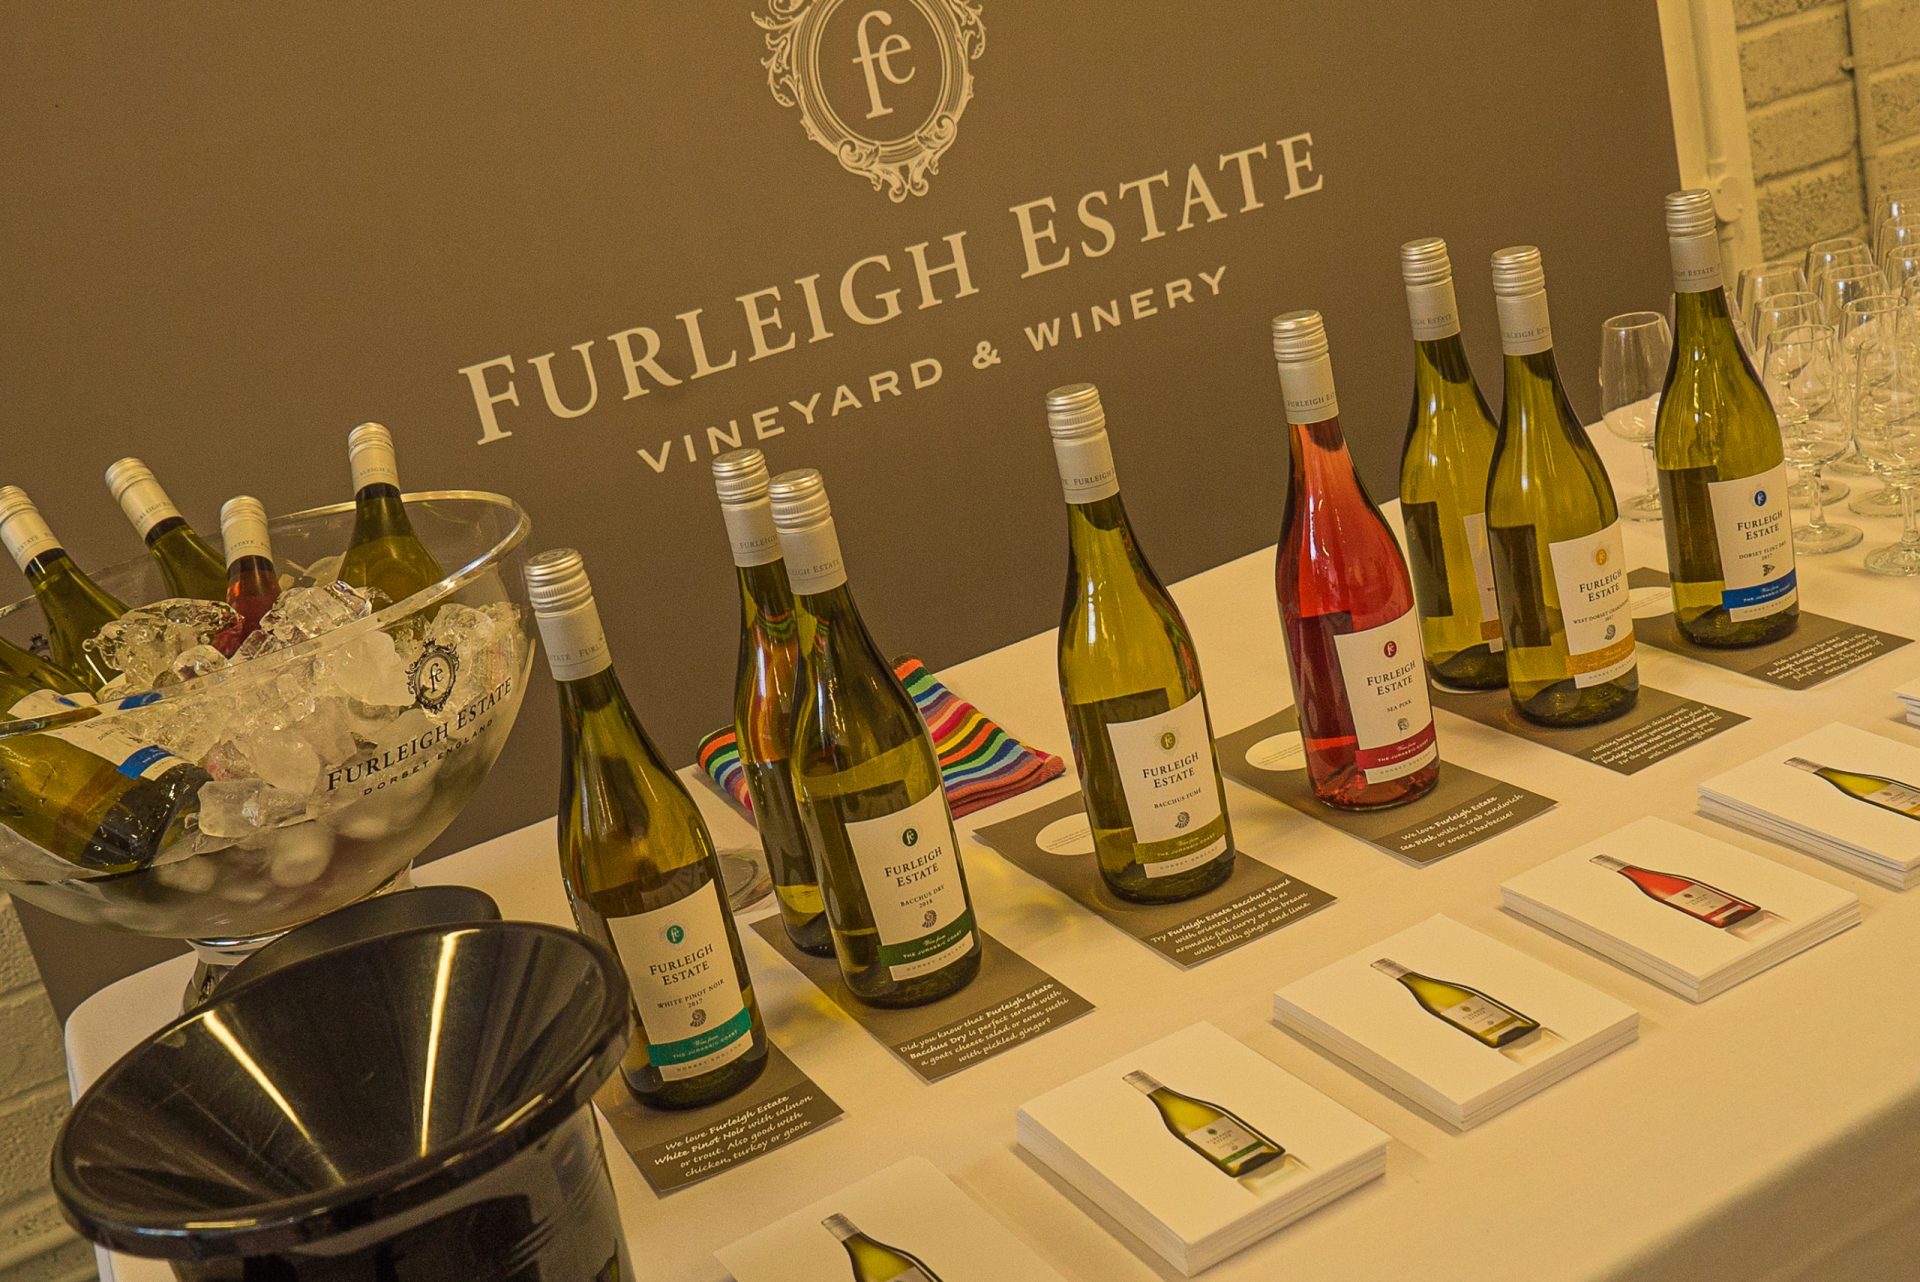 A selection of Furleigh Estate wines ready for tasting